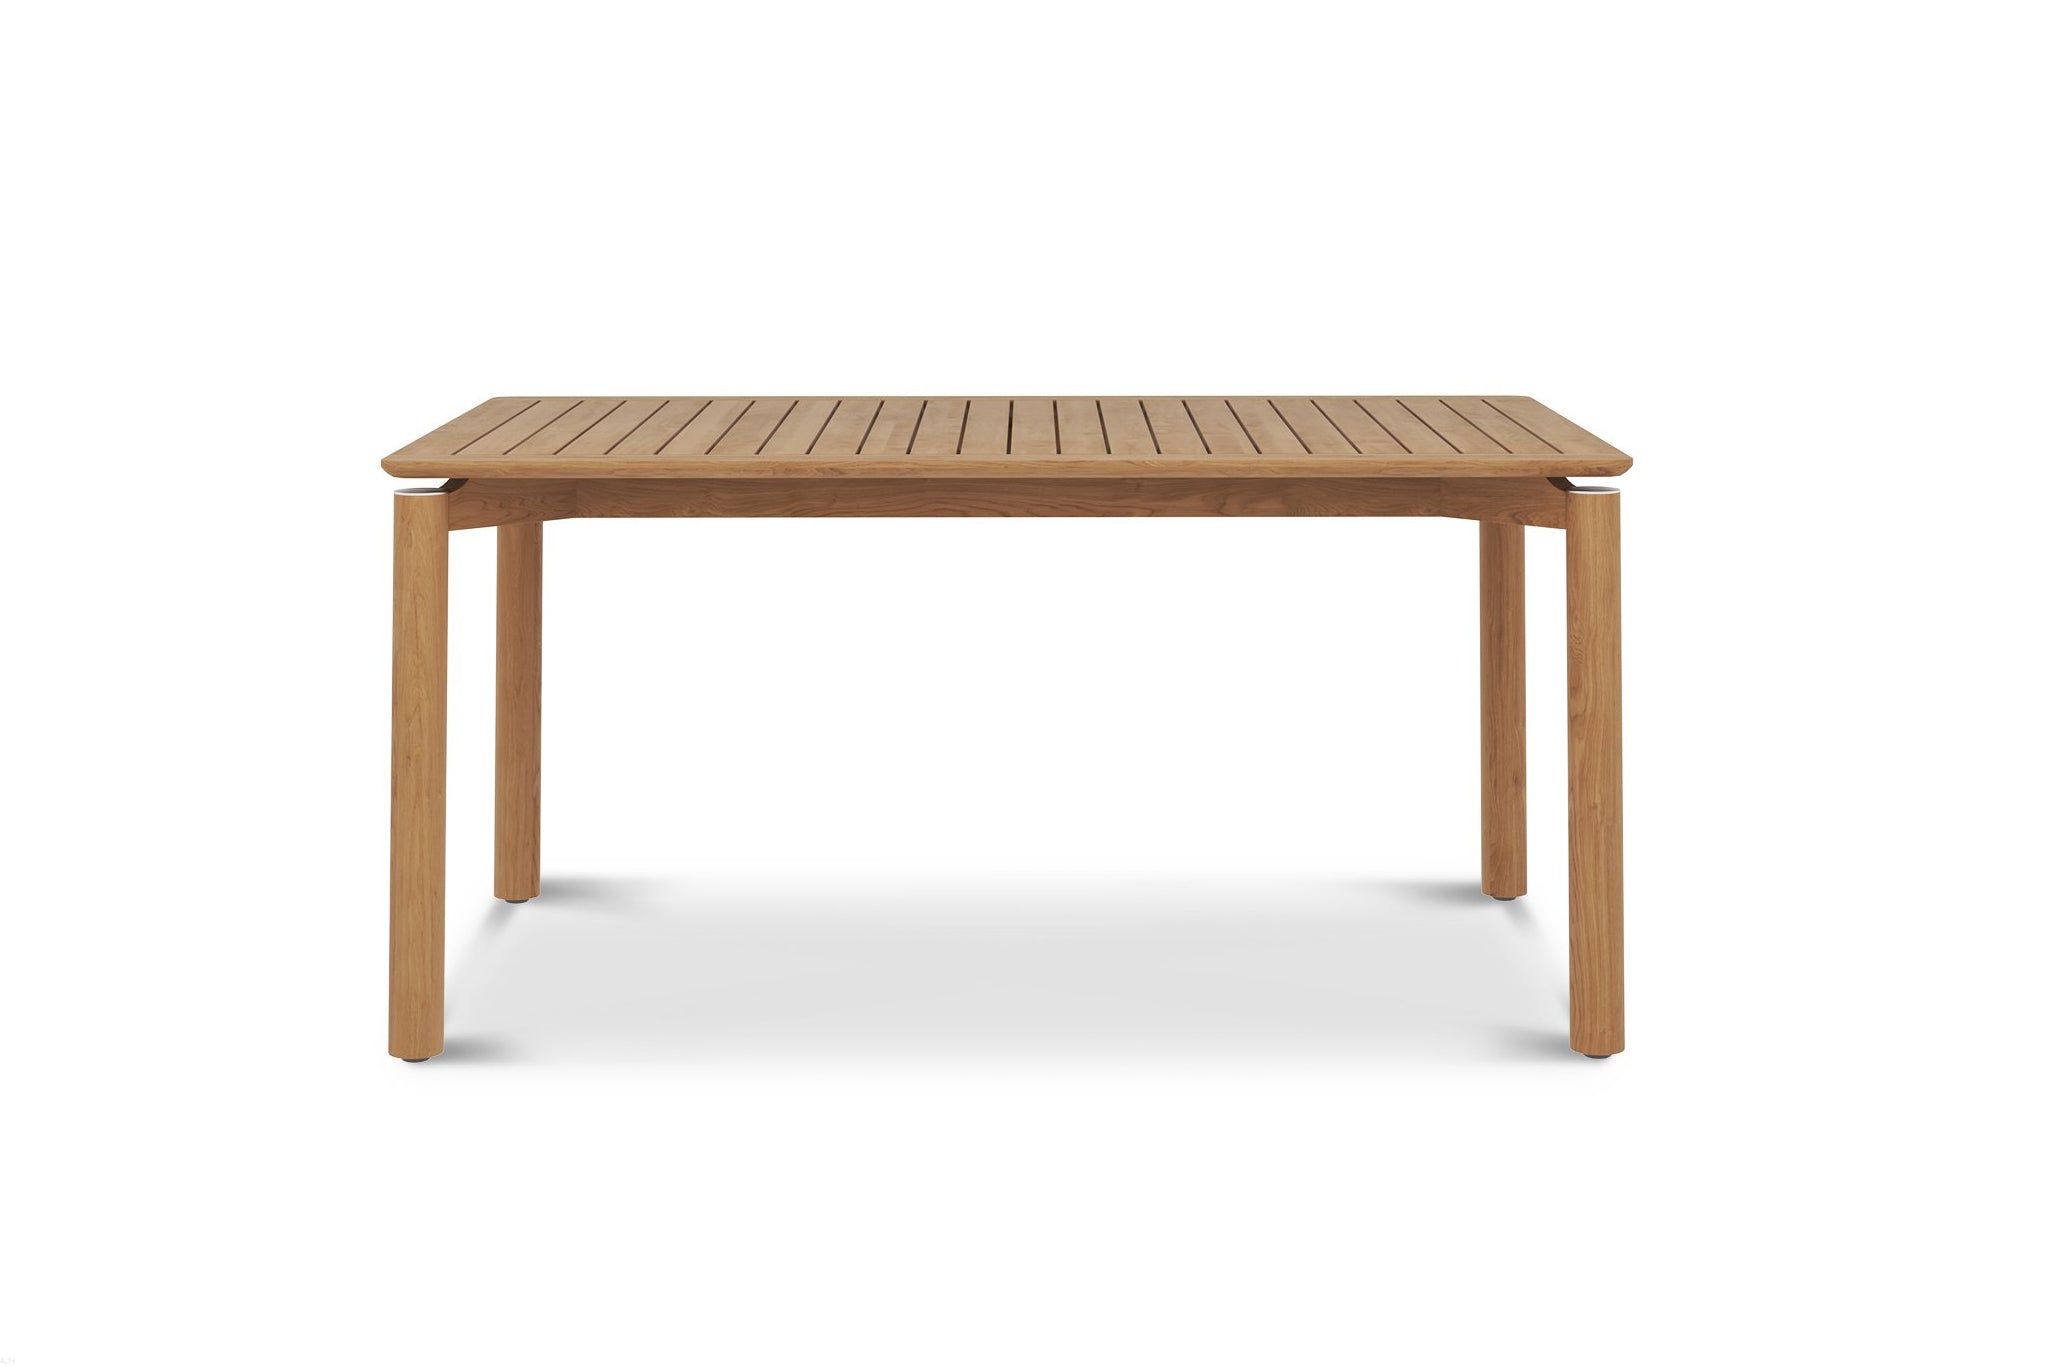 Jervis Bay Teak Outdoor Dining Table – 1.6m